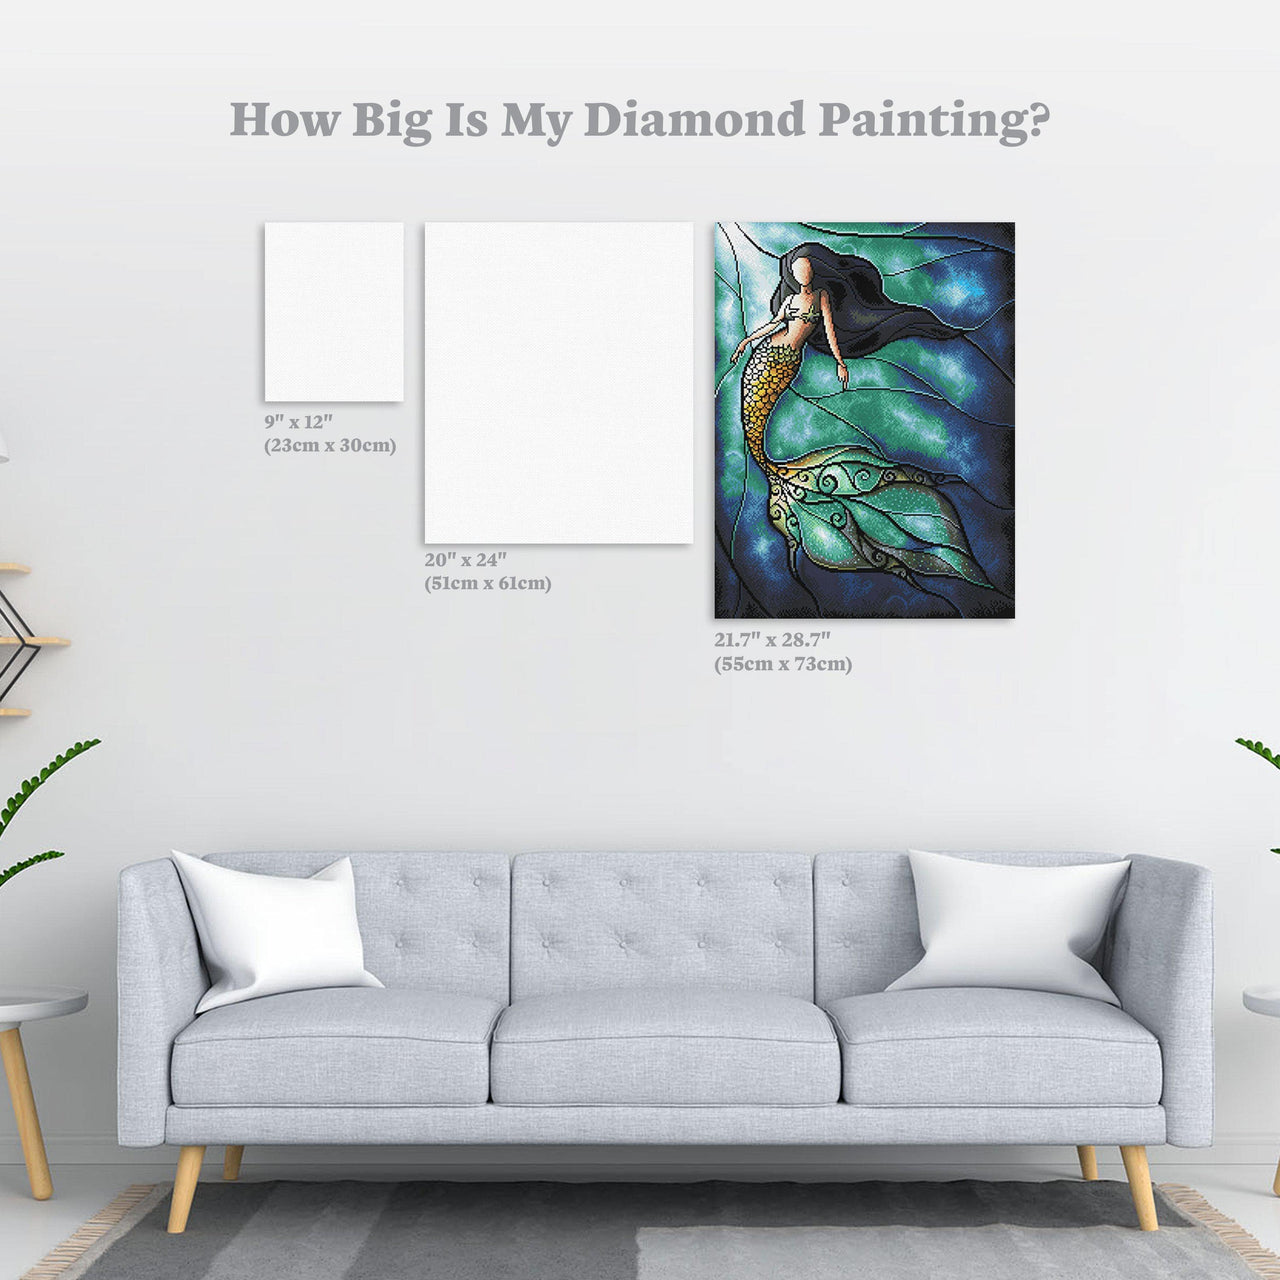 Diamond Painting The Siren 21.7" x 28.7"(55cm x 73cm) / Round With 33 Colors including 2 ABs / 50,310